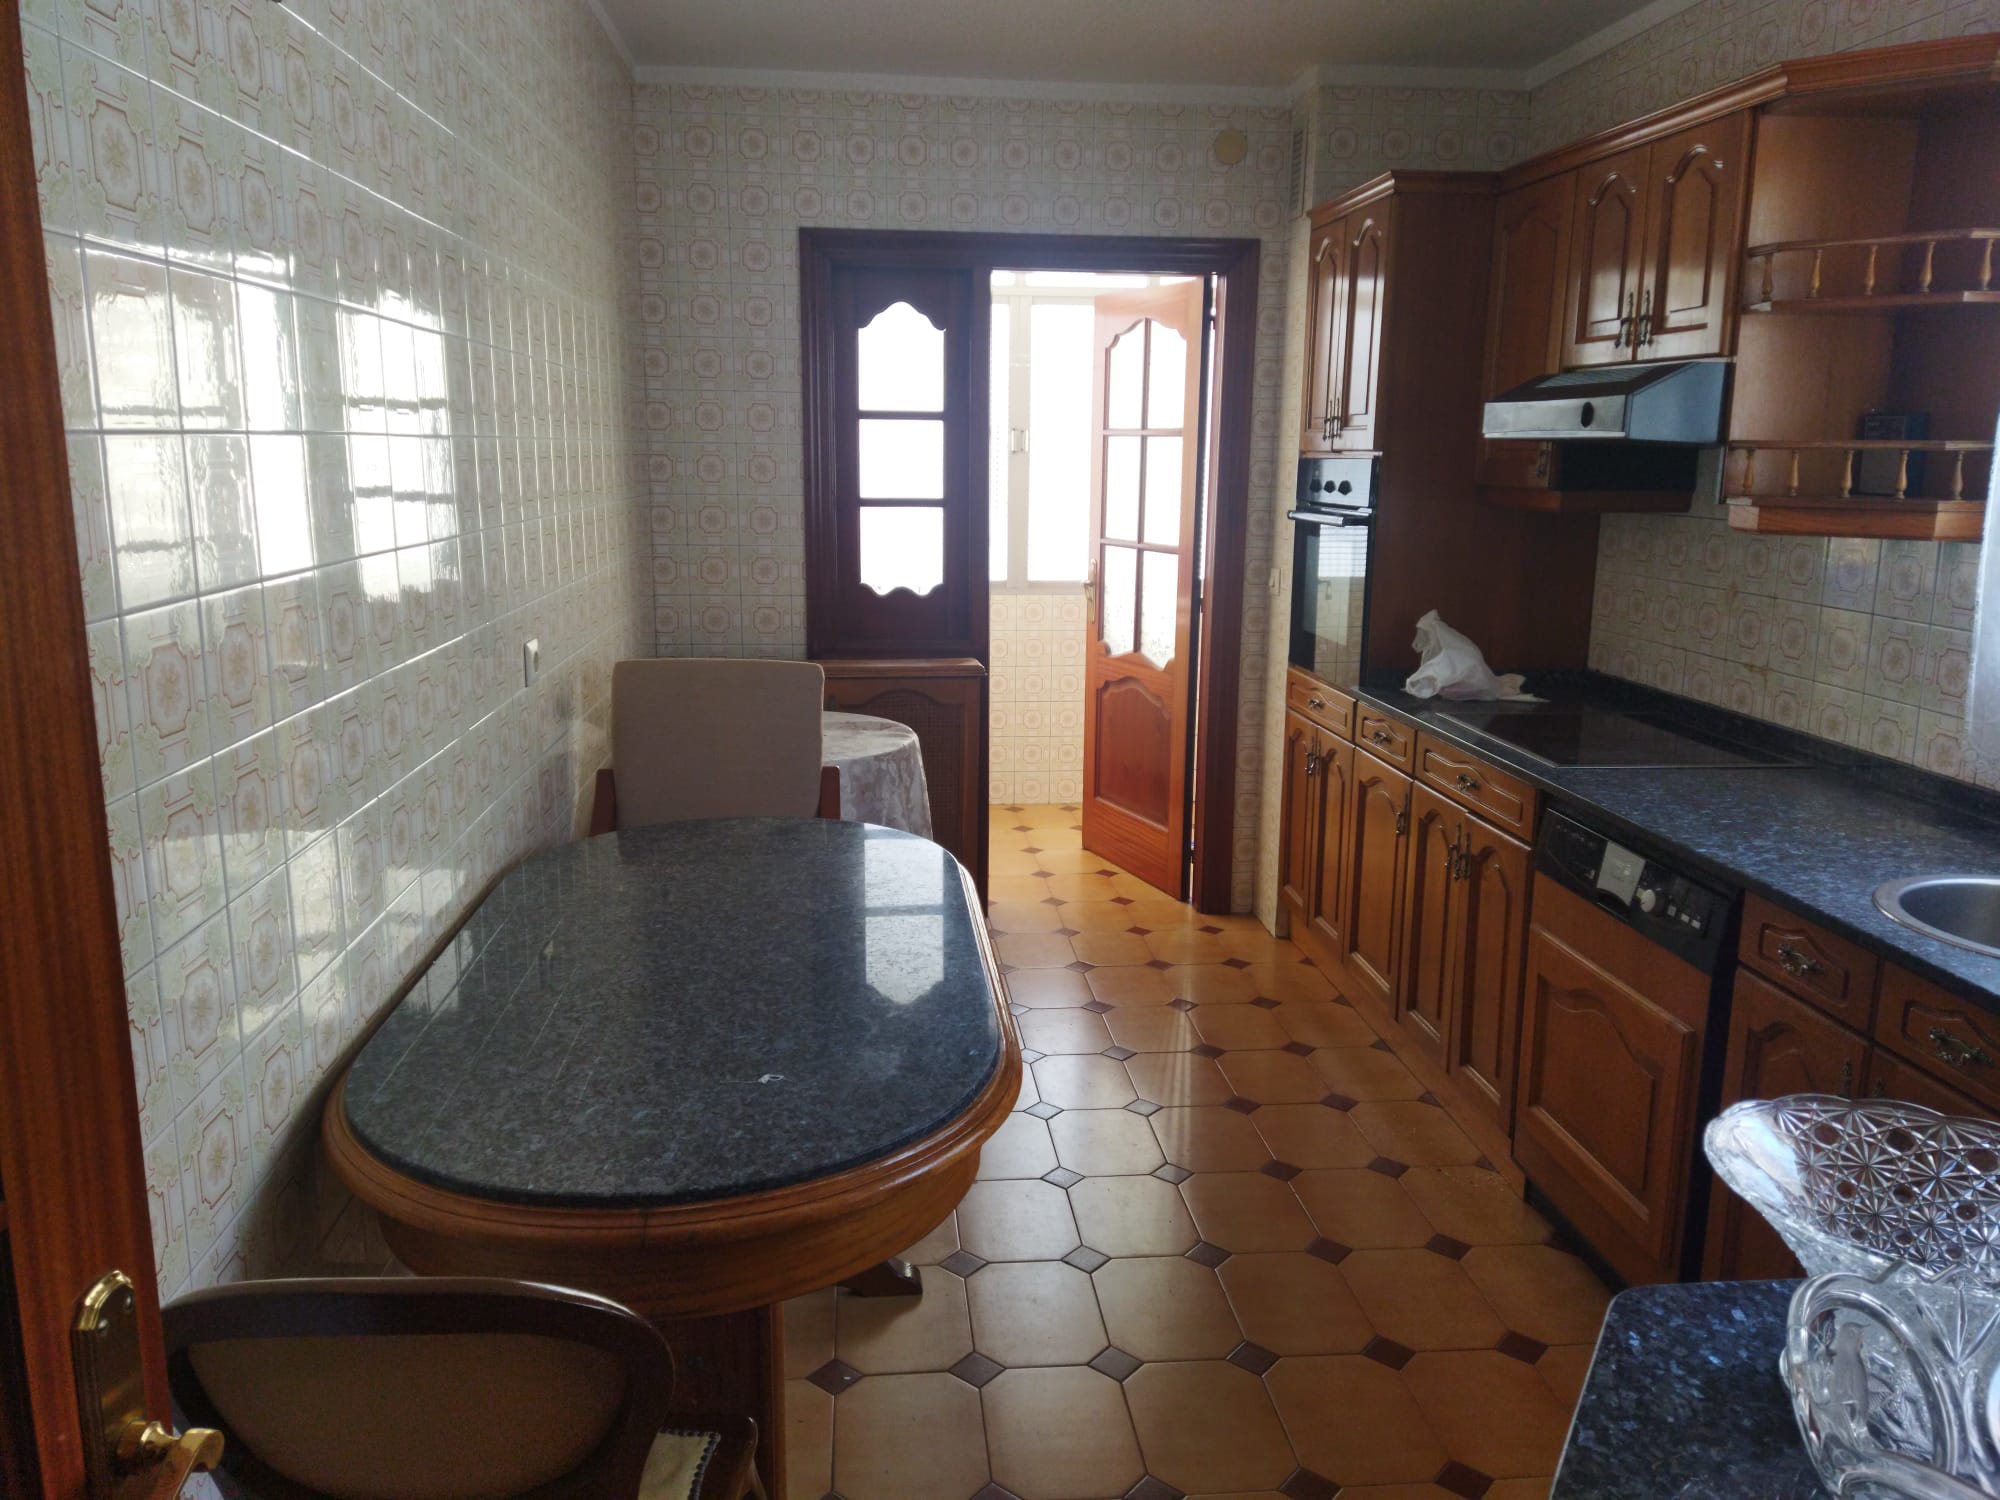 Apartment with 5 bedrooms, 3 bathrooms and private parking space in the centre of Aviles (Sabugo)